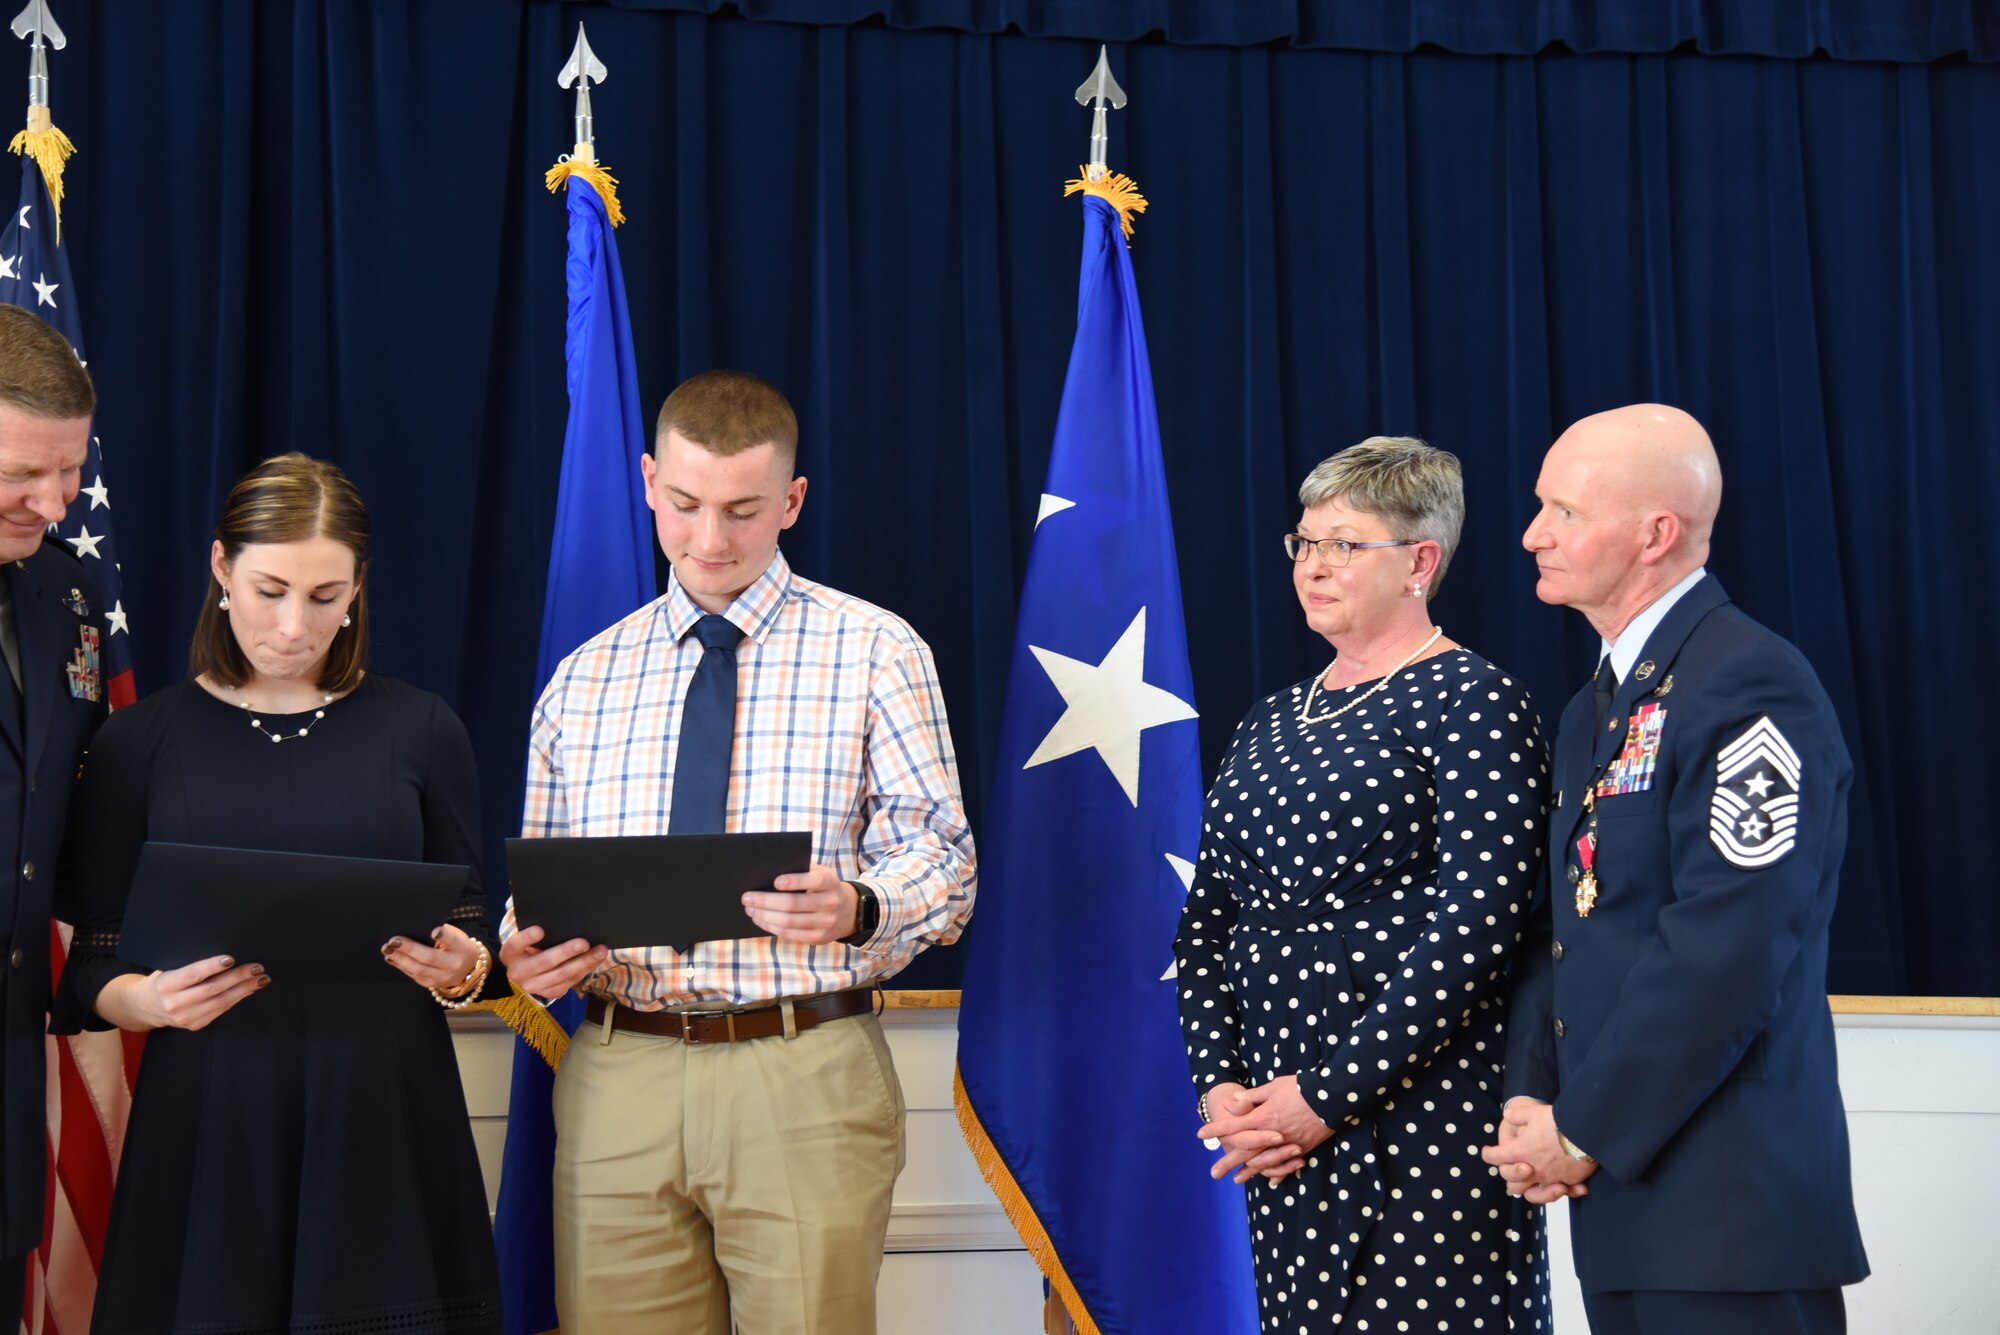 Chief Master Sgt. Thomas F. Good, 20th Air Force command chief, looks on as his children receive certificates of appreciation during his retirement ceremony March 5, 2019, at F. E. Warren Air Force Base, Wyo. Chief Good retired as the 20th Air Force command chief in the presence of his wife, children and friends. (U.S. Air Force photo by Senior Airman Nicole Reed)